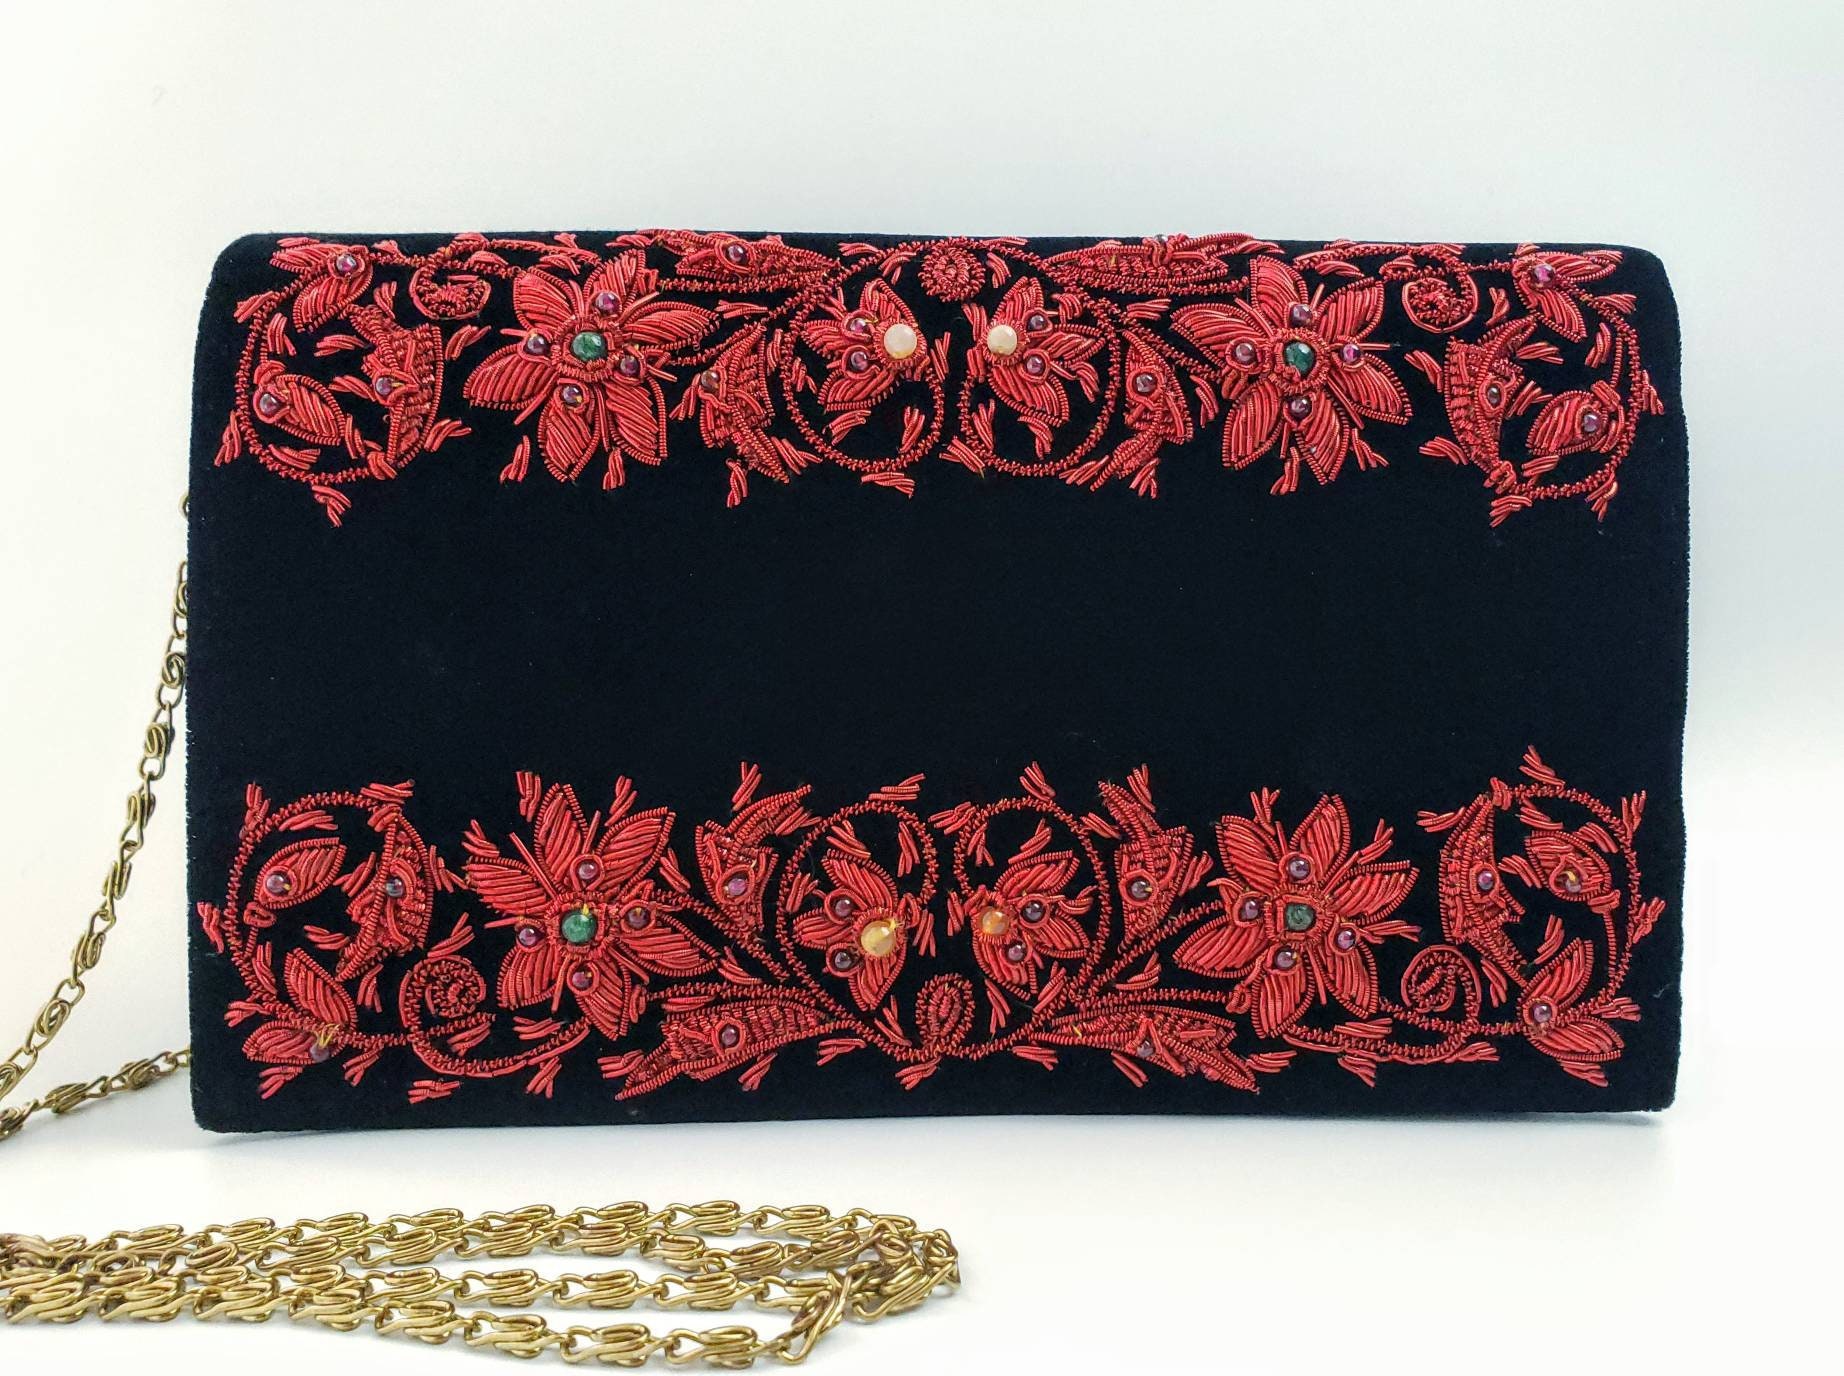 Christmas red party clutch, embroidered black velvet clutch